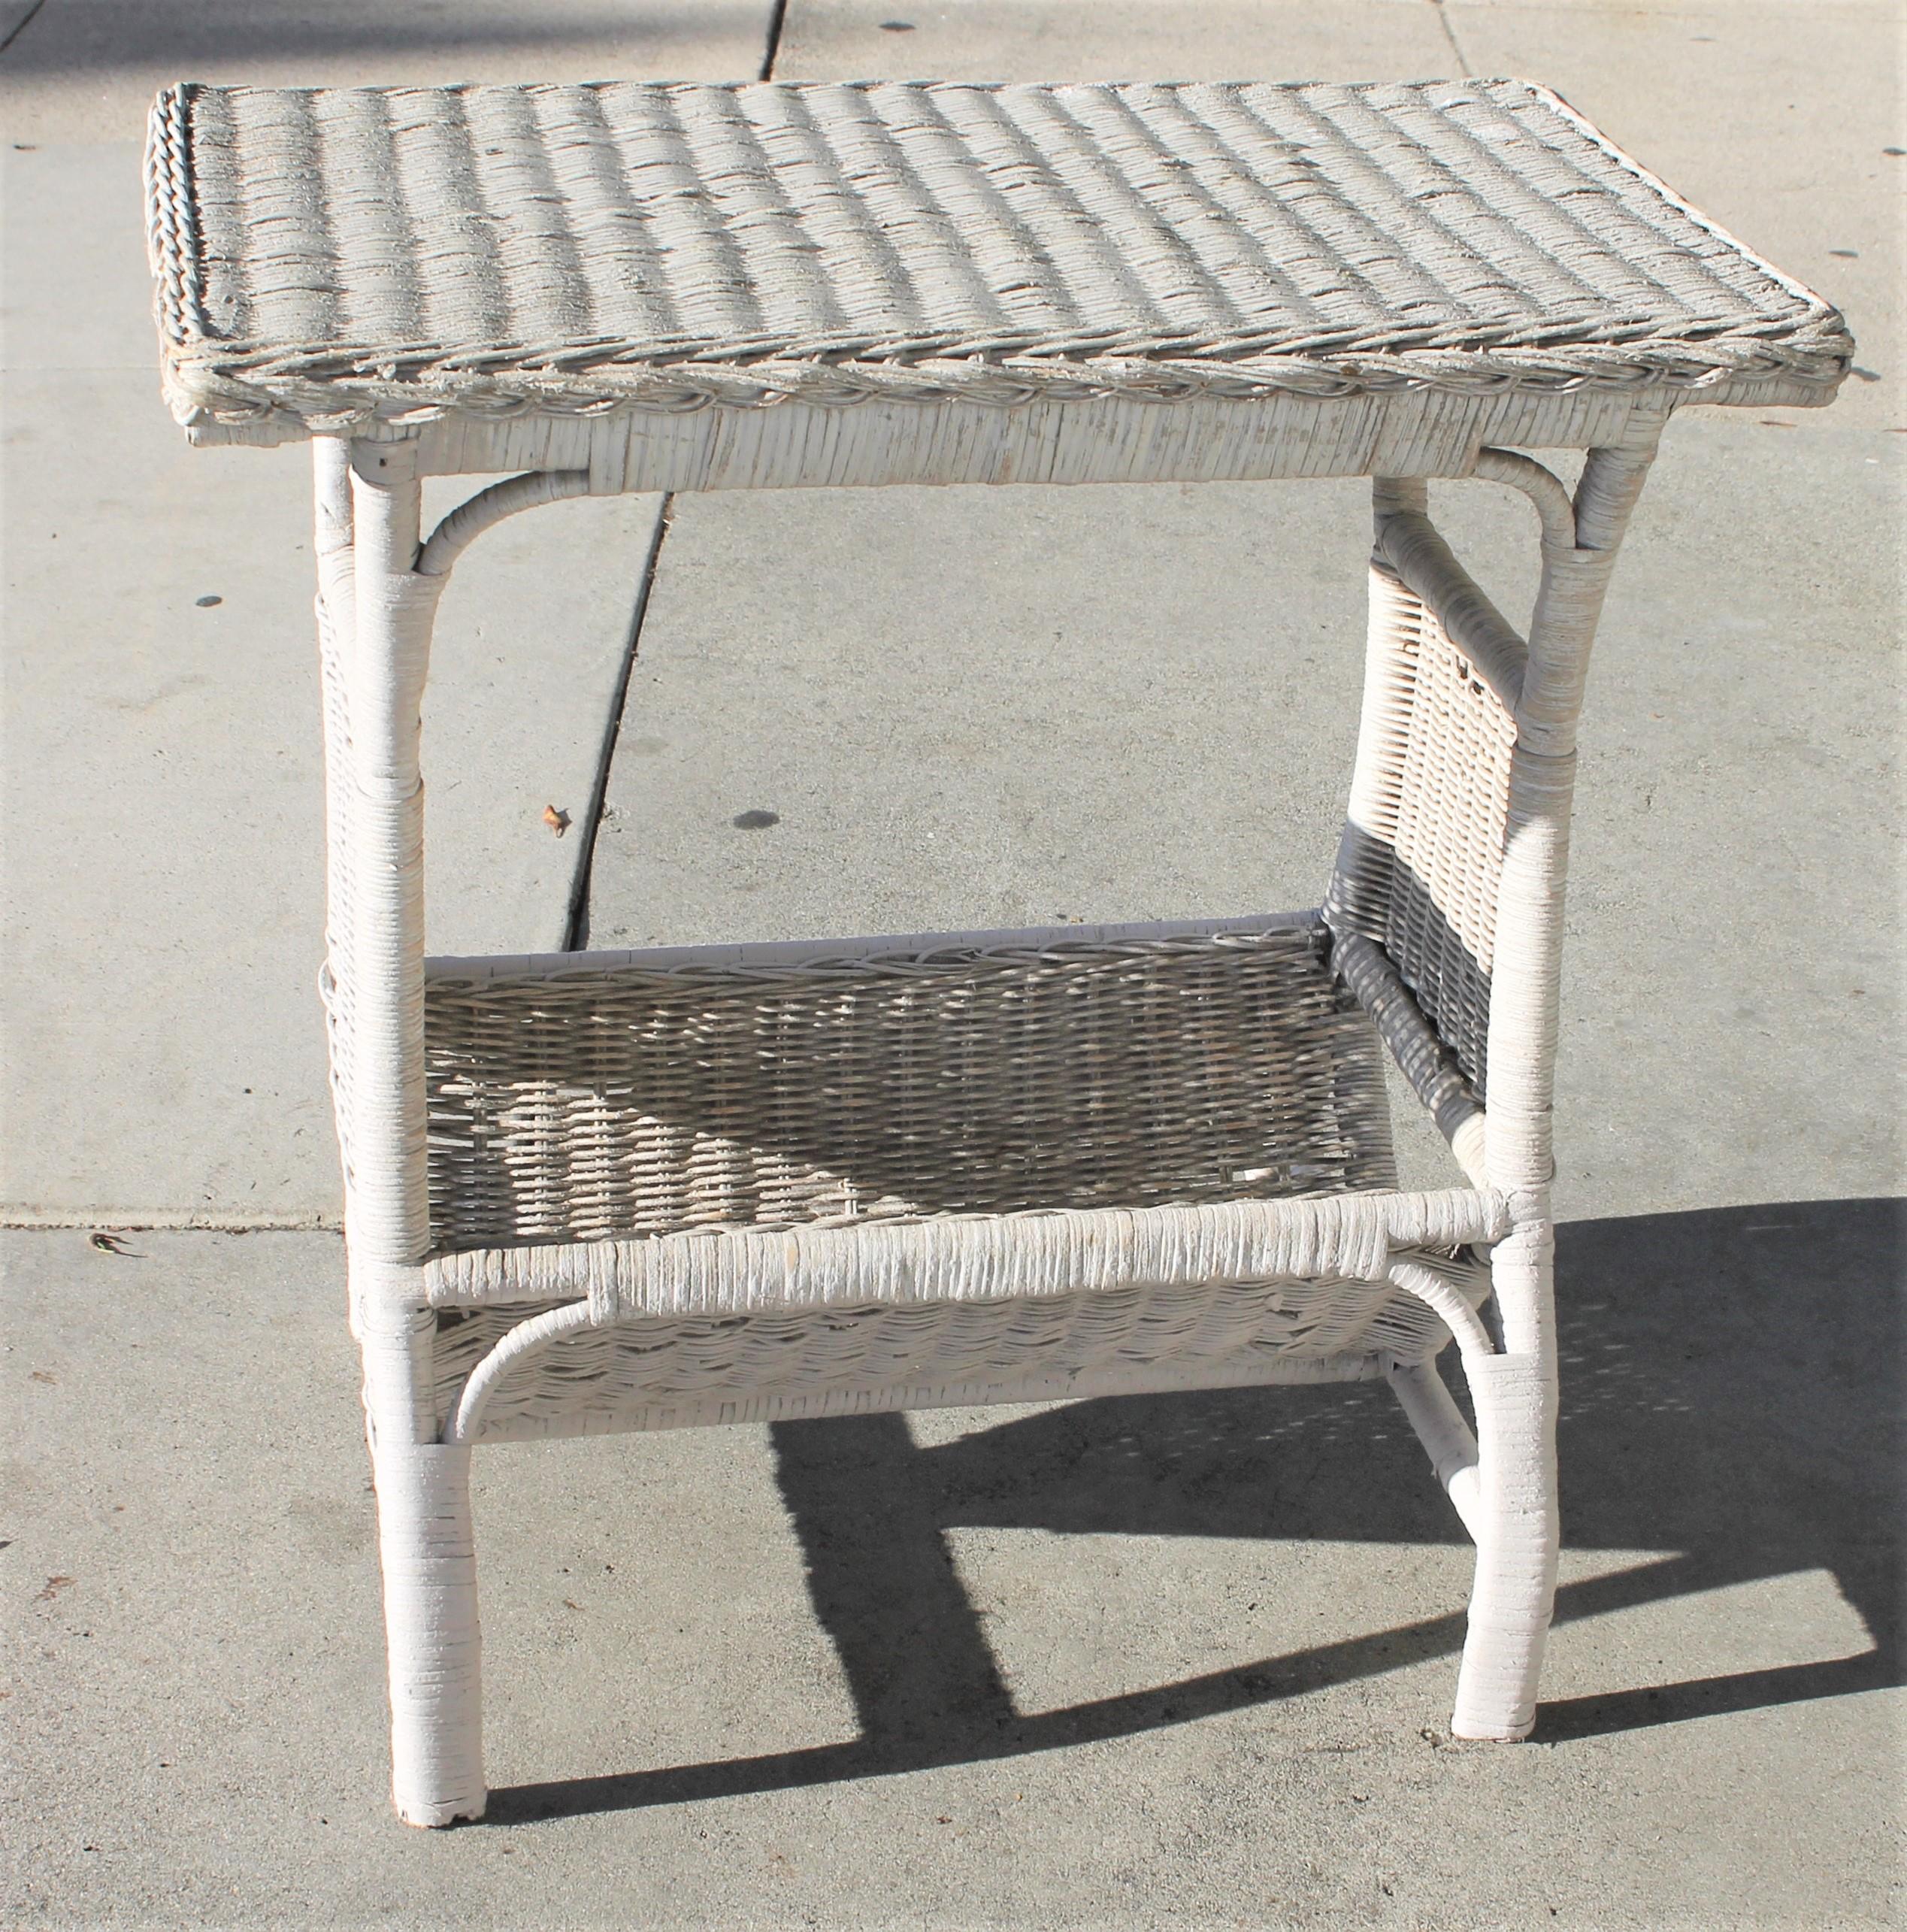 Adirondack Wicker Side Table in Original White Painted Surface